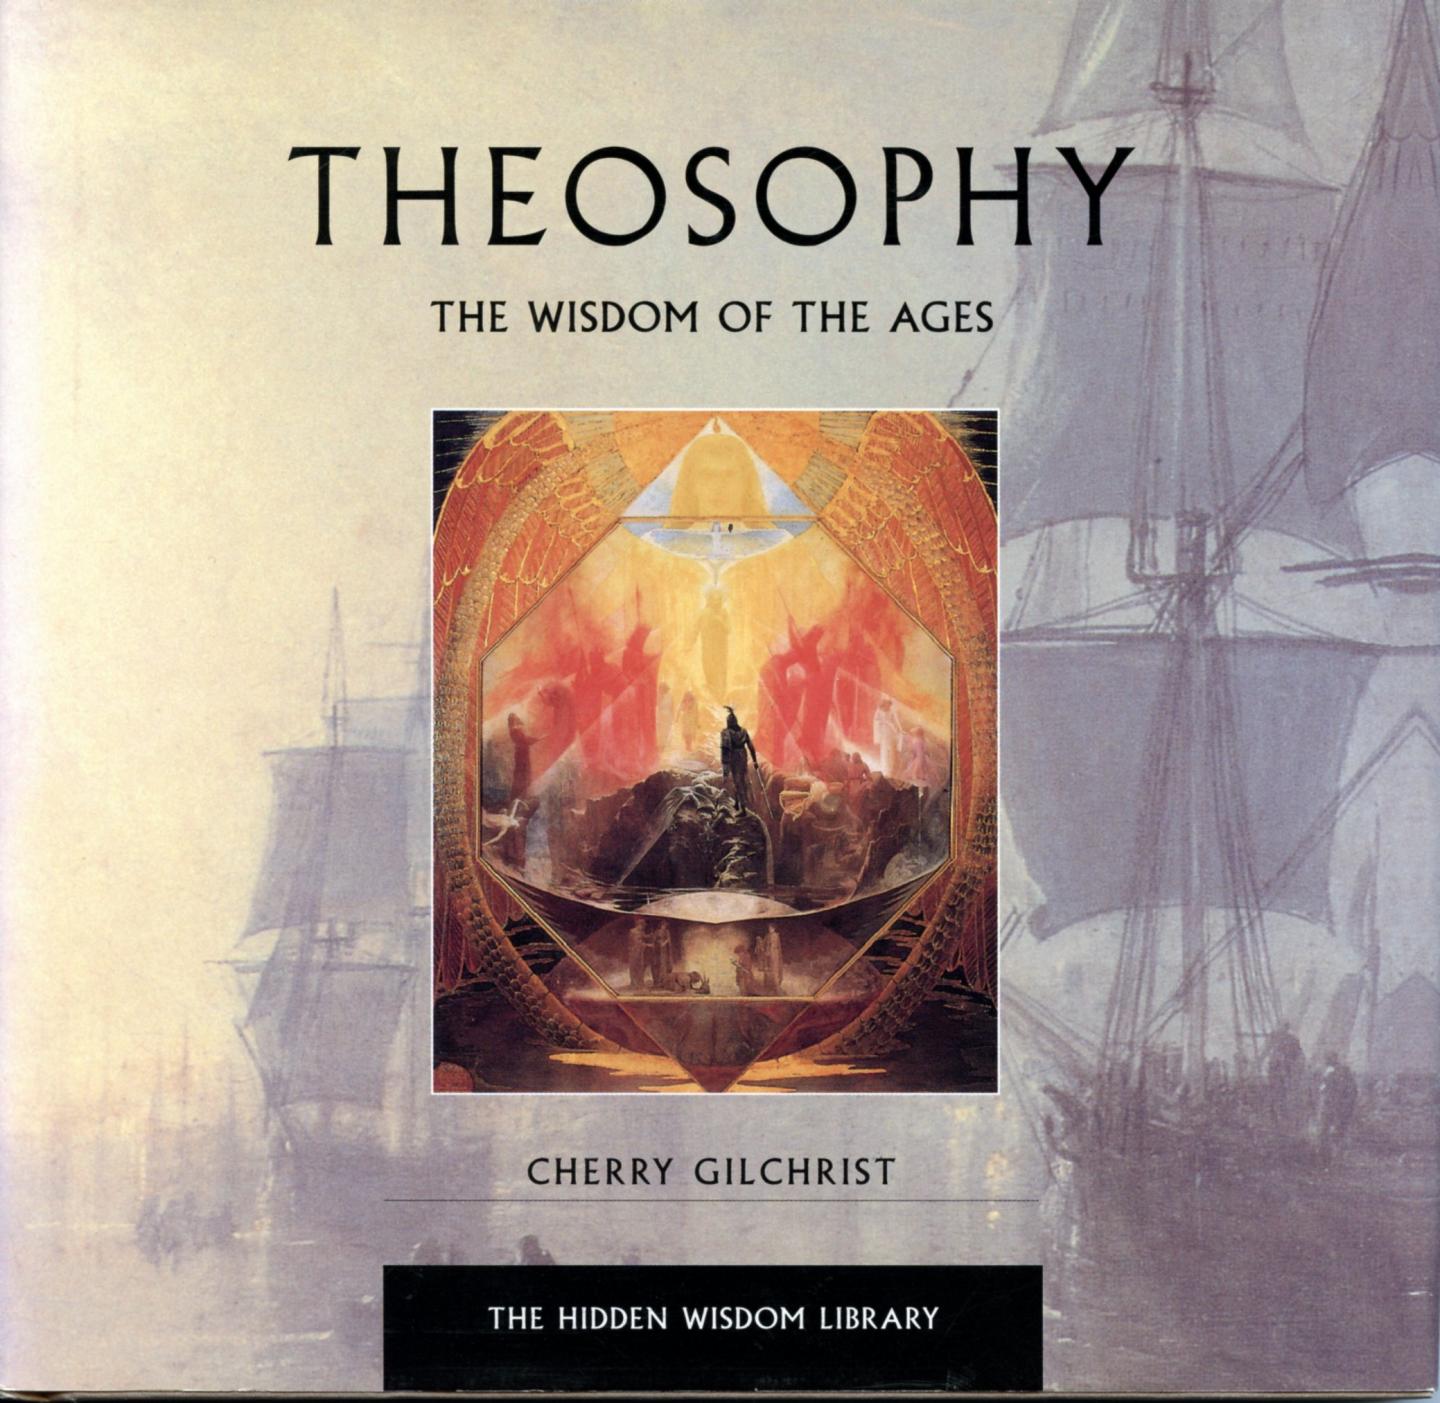 Gilchrist, Cherry - Theosophy - The Wisdom of the Ages